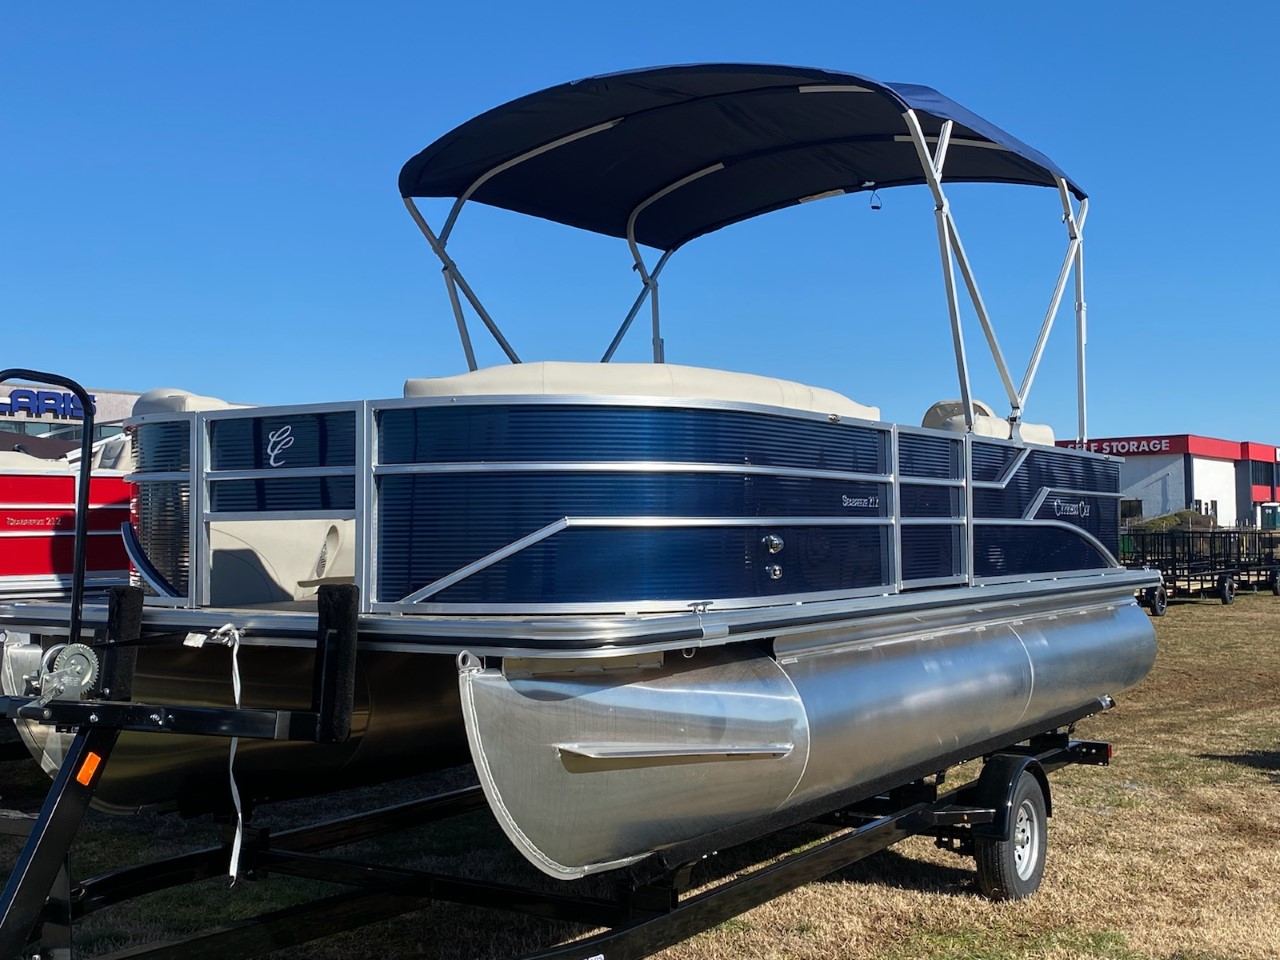 2022 CYPRESS CAY SEABREEZE 212 Pontoon Boat for sale in College Dale, TN - image 4 